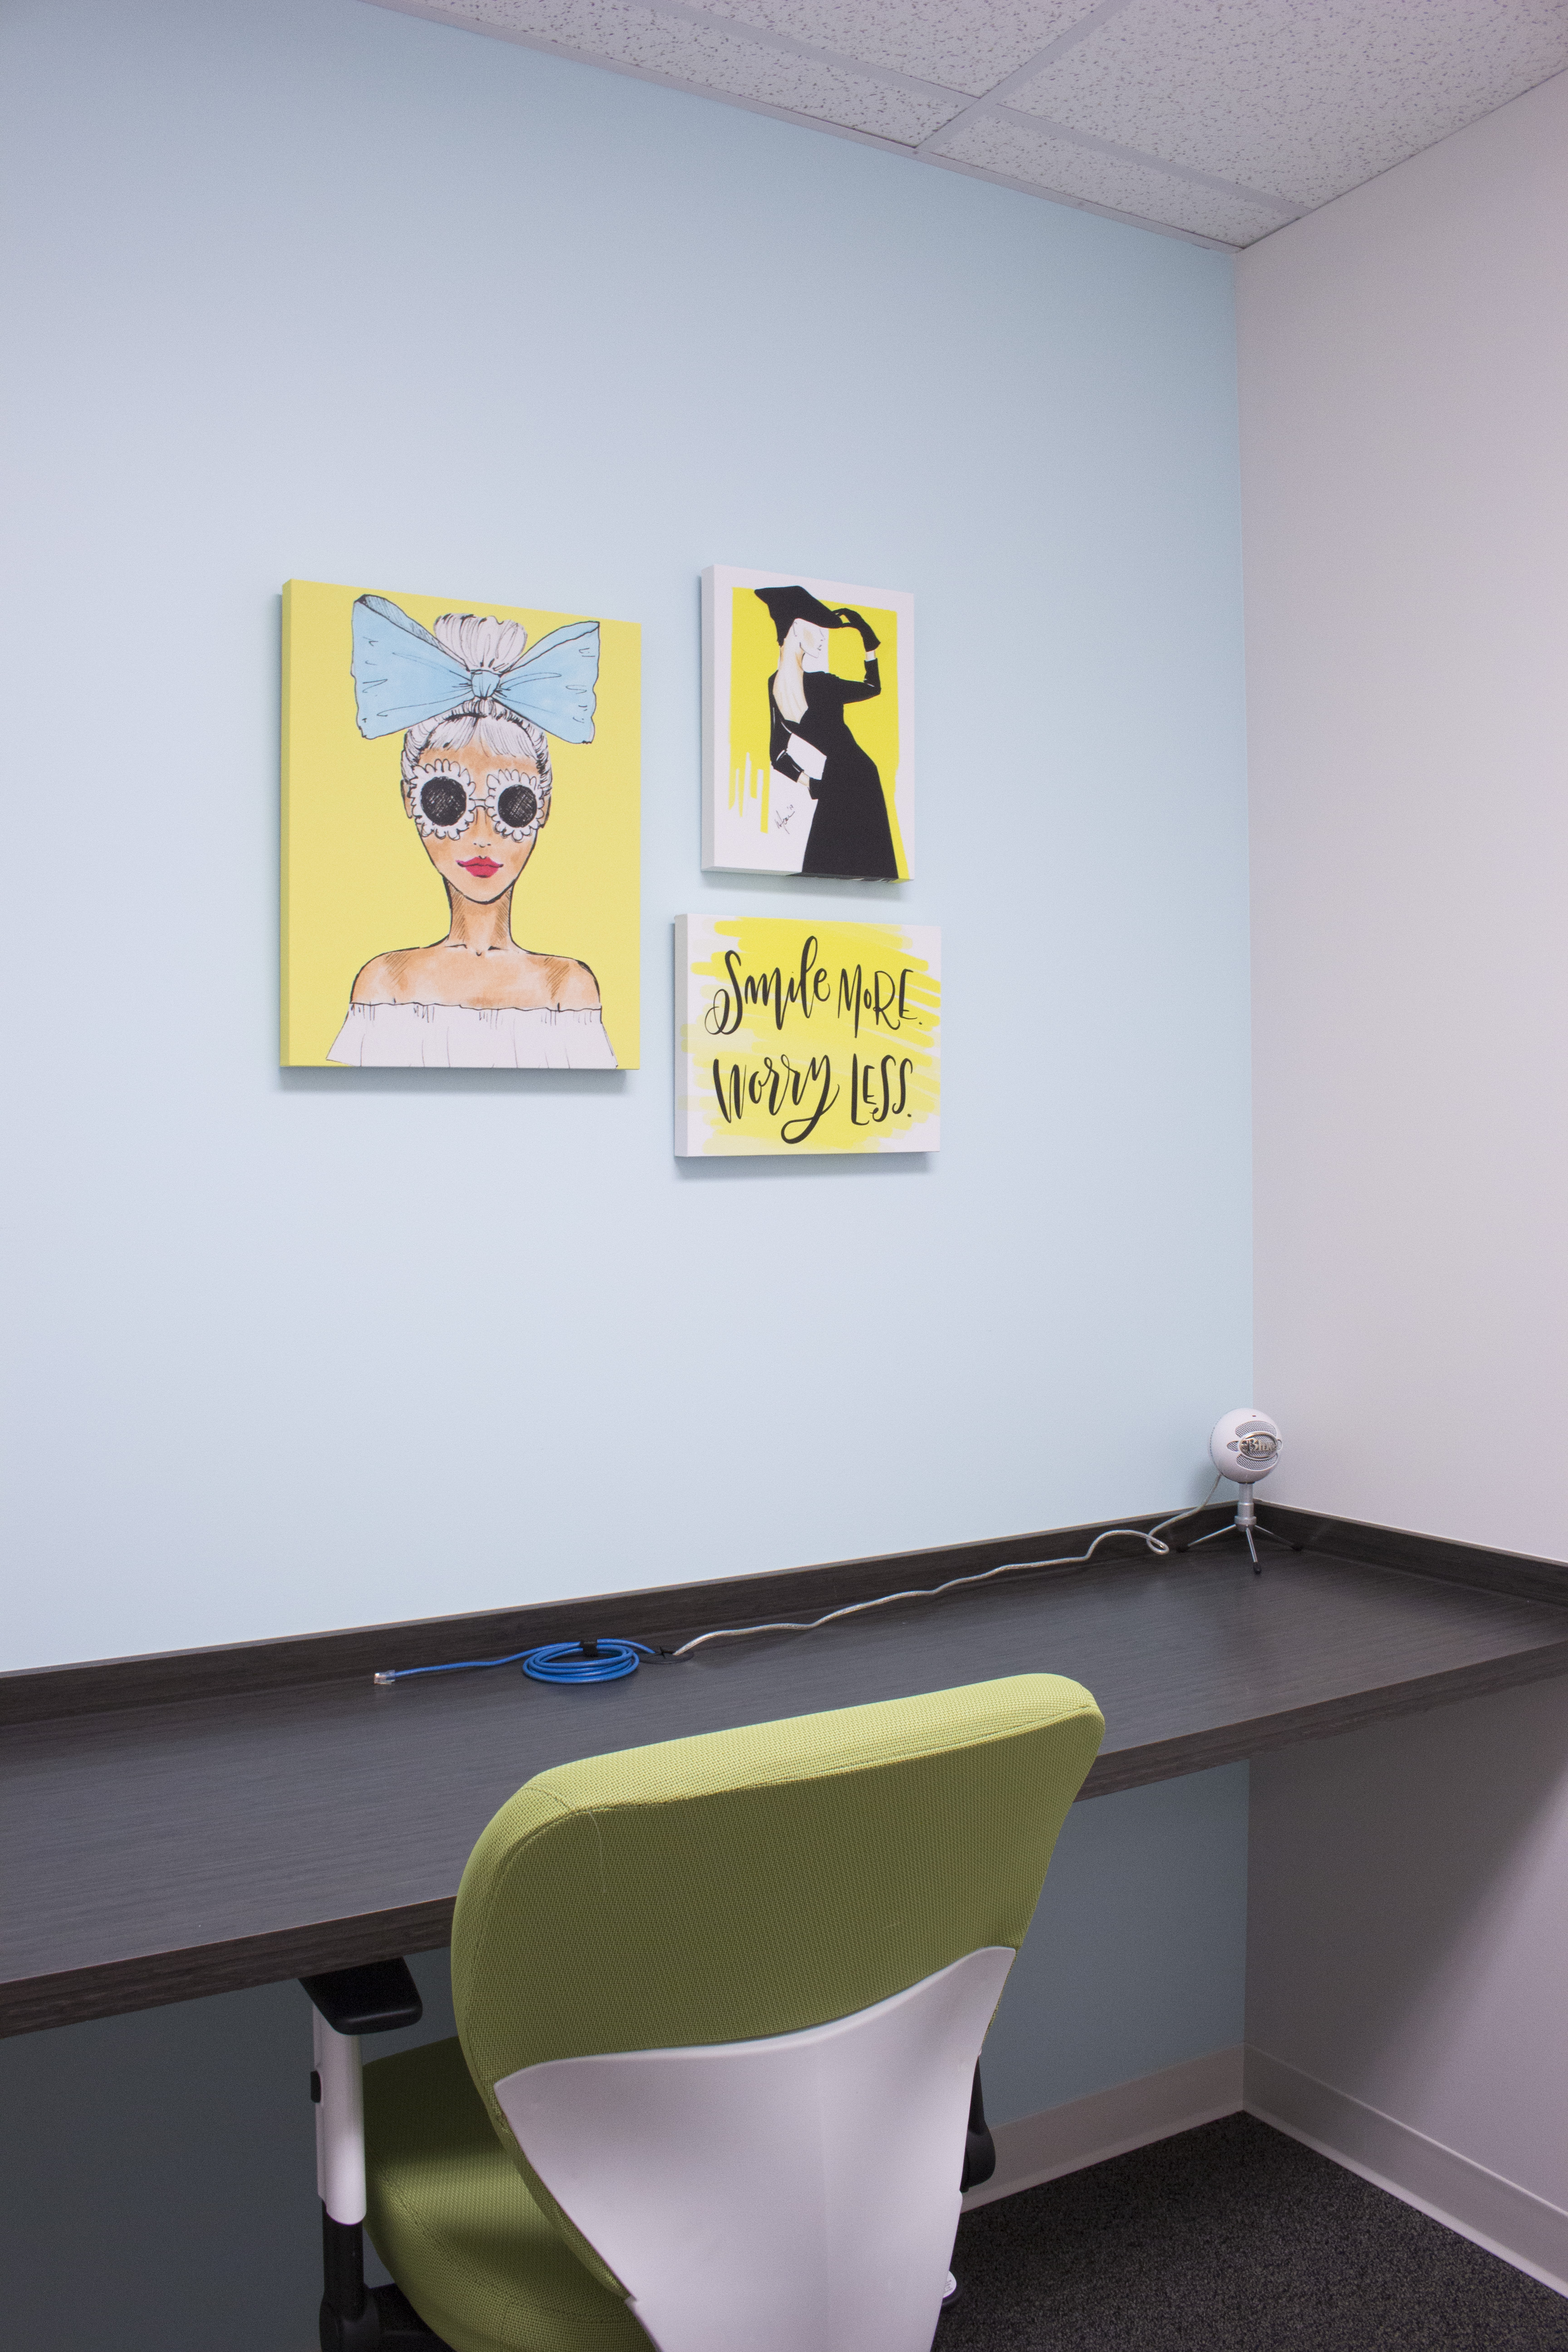 Take a virtual tour of the Tombow USA office space, complete with artwork by Tombow's Brand Ambassadors, printed on canvas by Mixbook